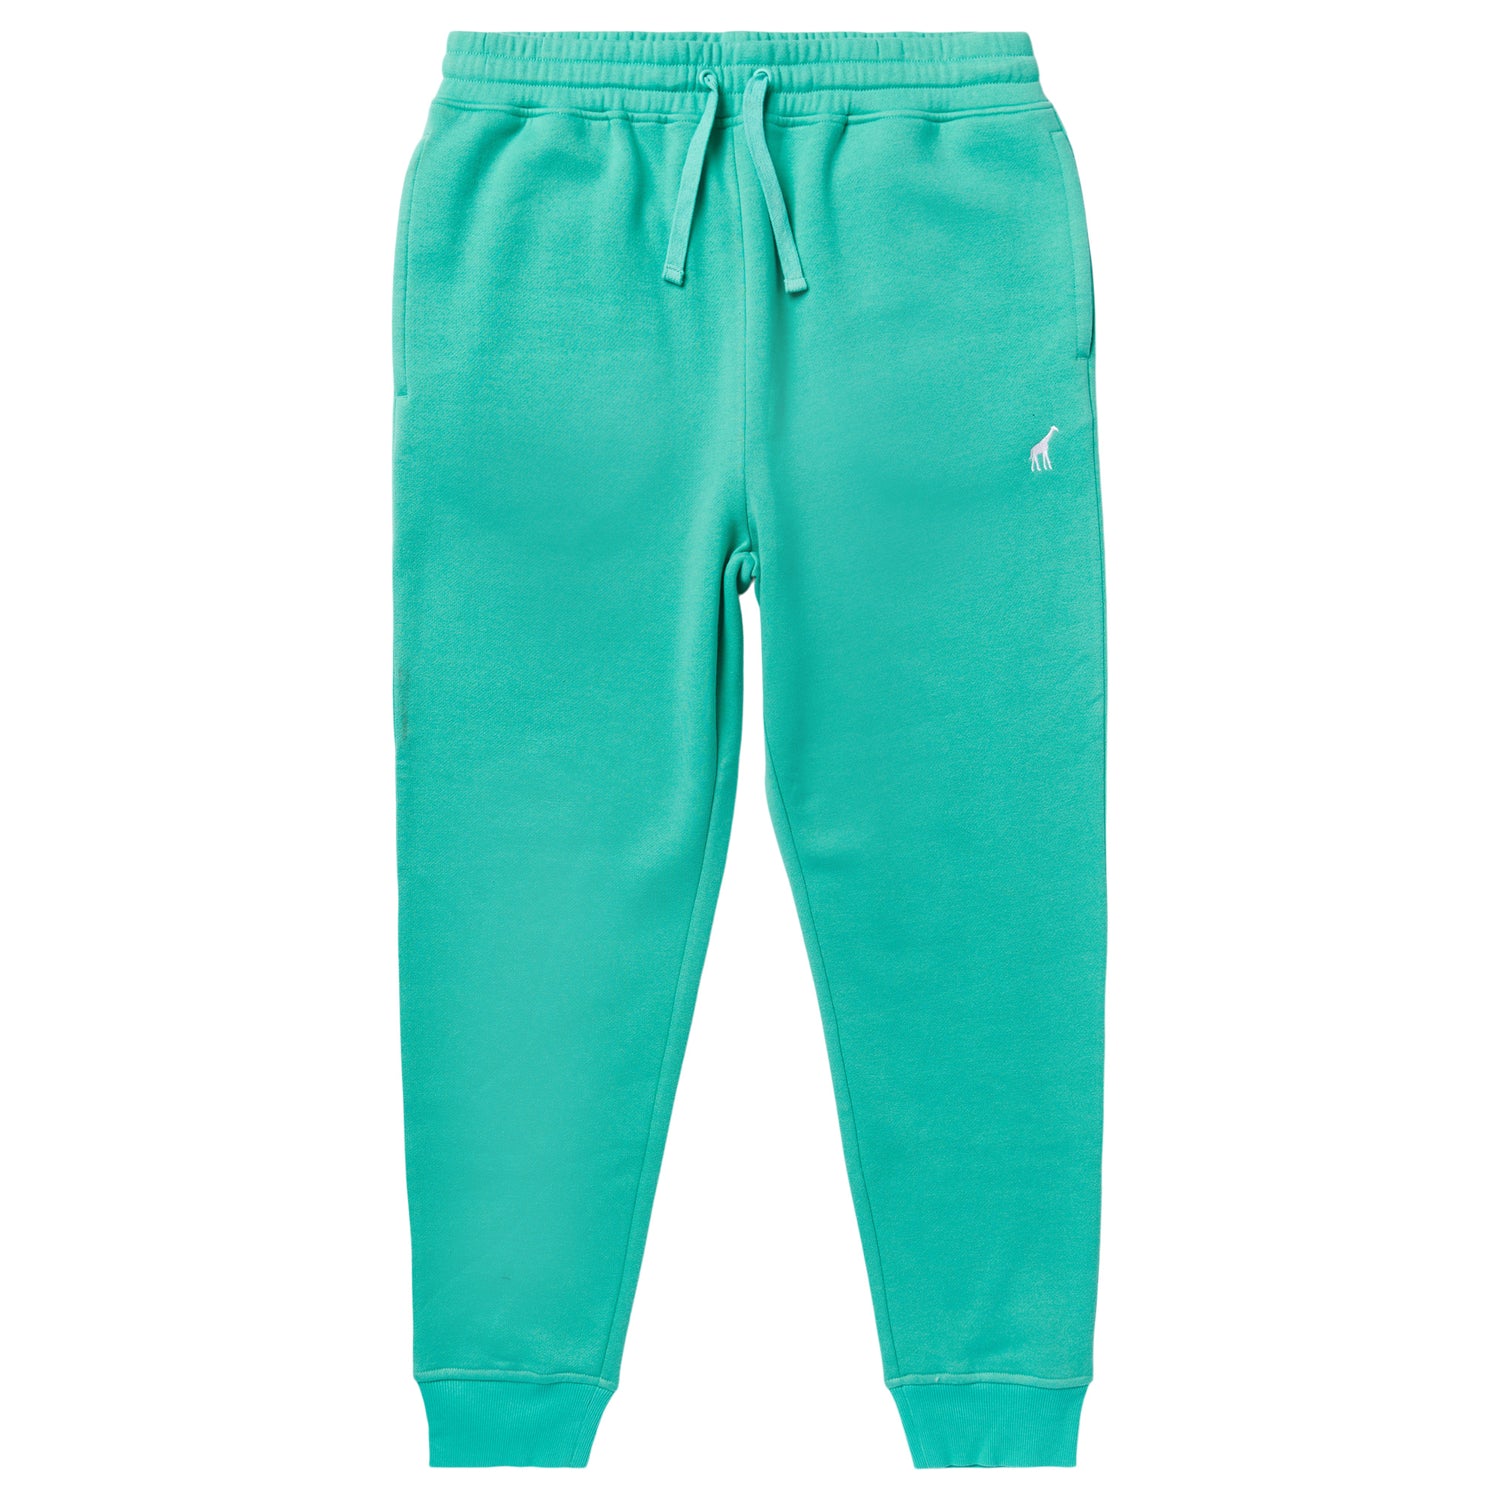 Splendid Green Supersoft Joggers – Mena and Co. Boutique